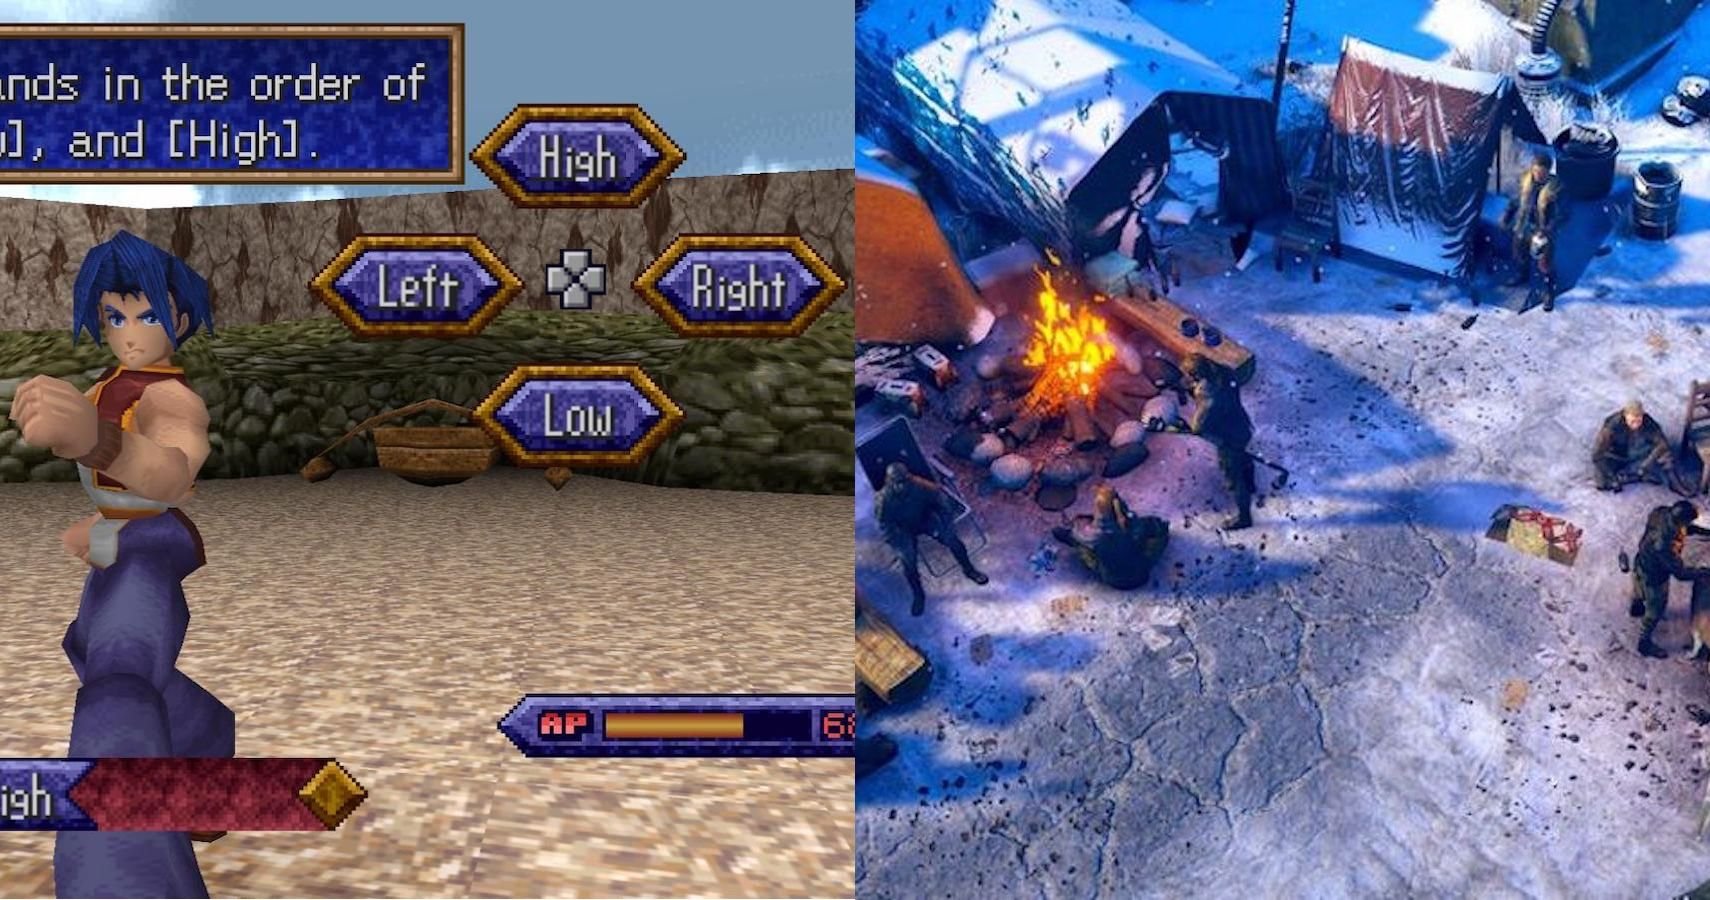 10 Things About Every RPG That Make No Sense